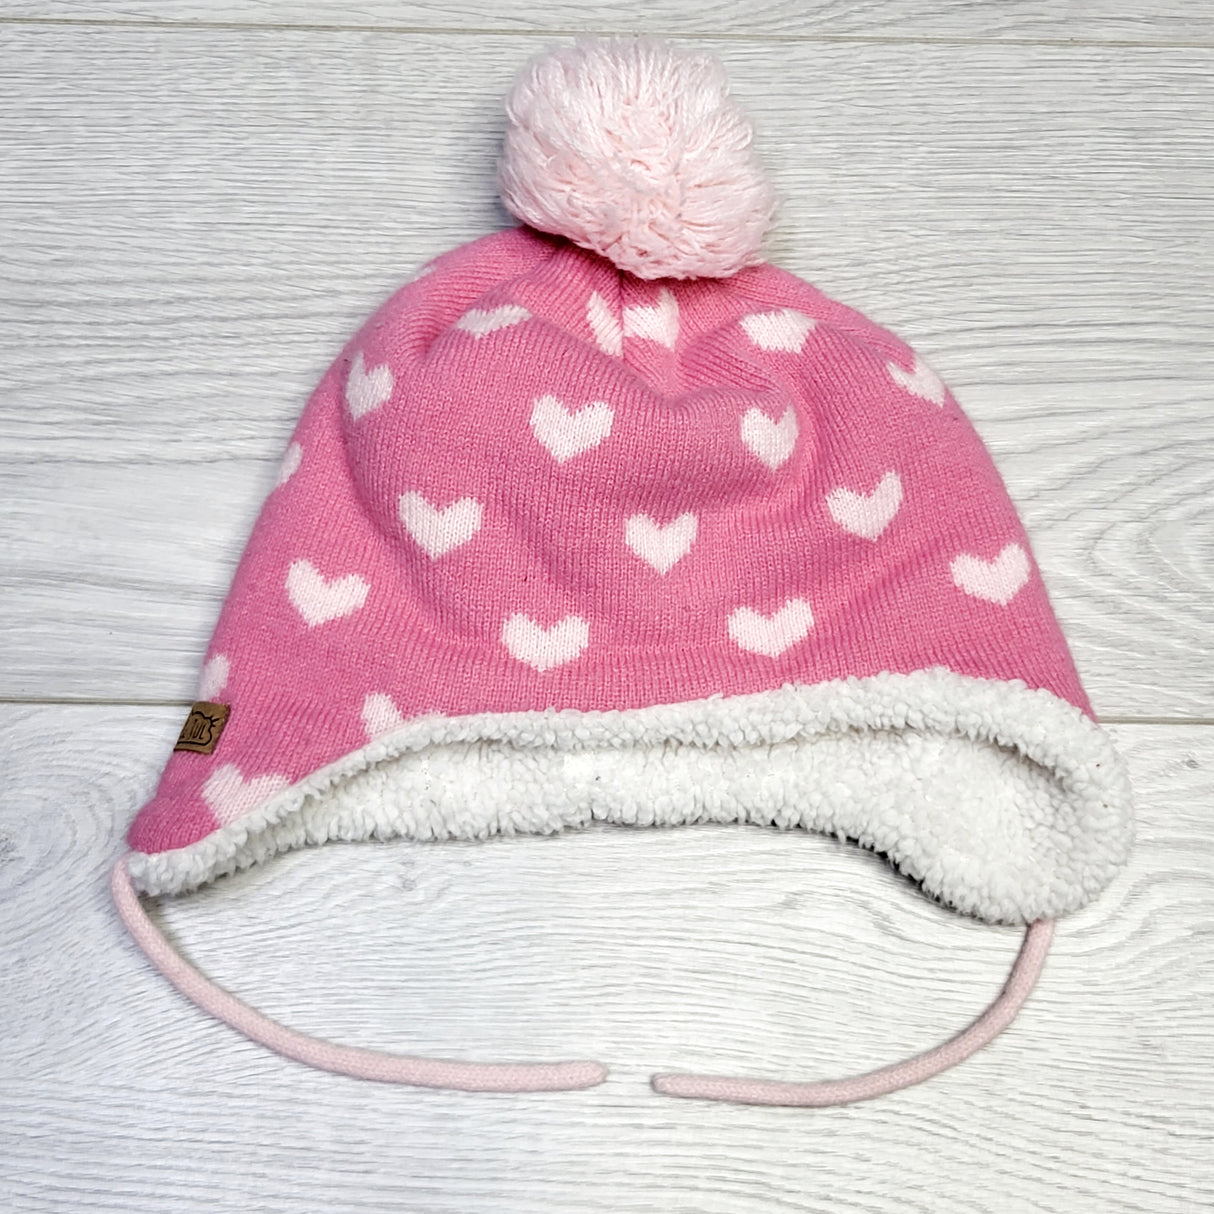 KJHN1 - Jan and Jul minky lined hat with hearts. Size small (3-9 months)